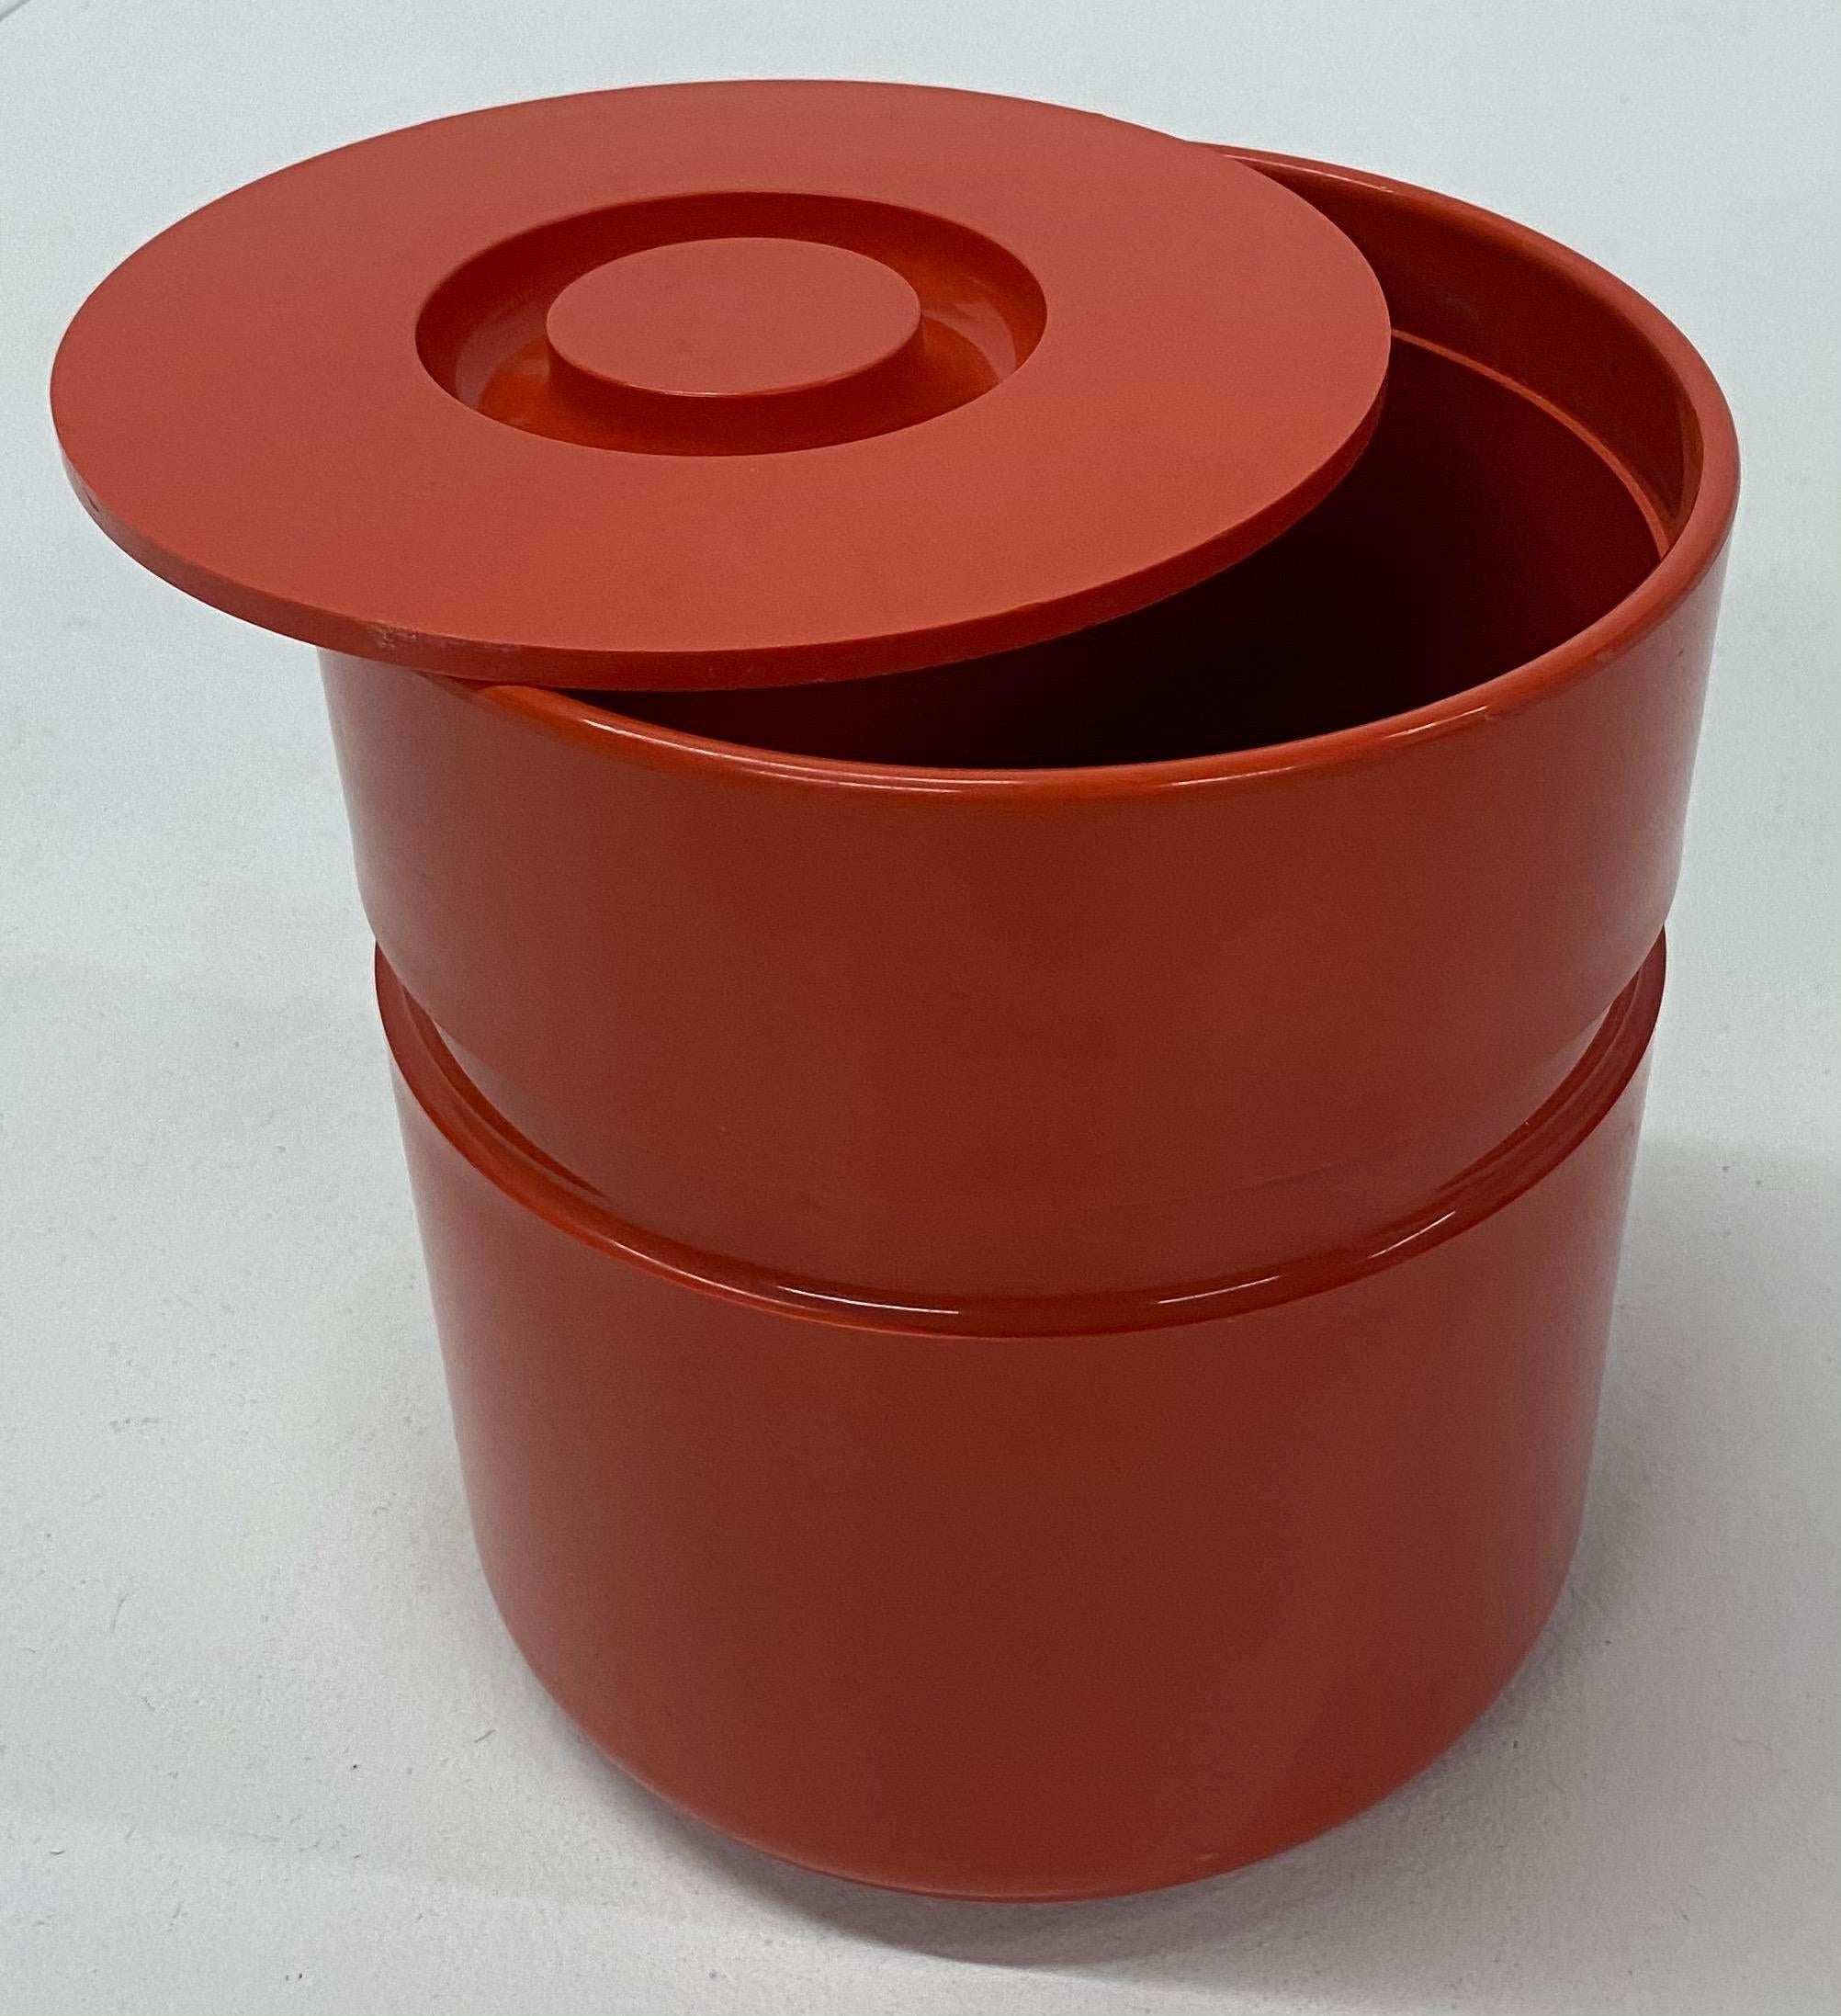 Red plastic ice bucket with lid designed by Sergio Asti for Heller circa 1970s.